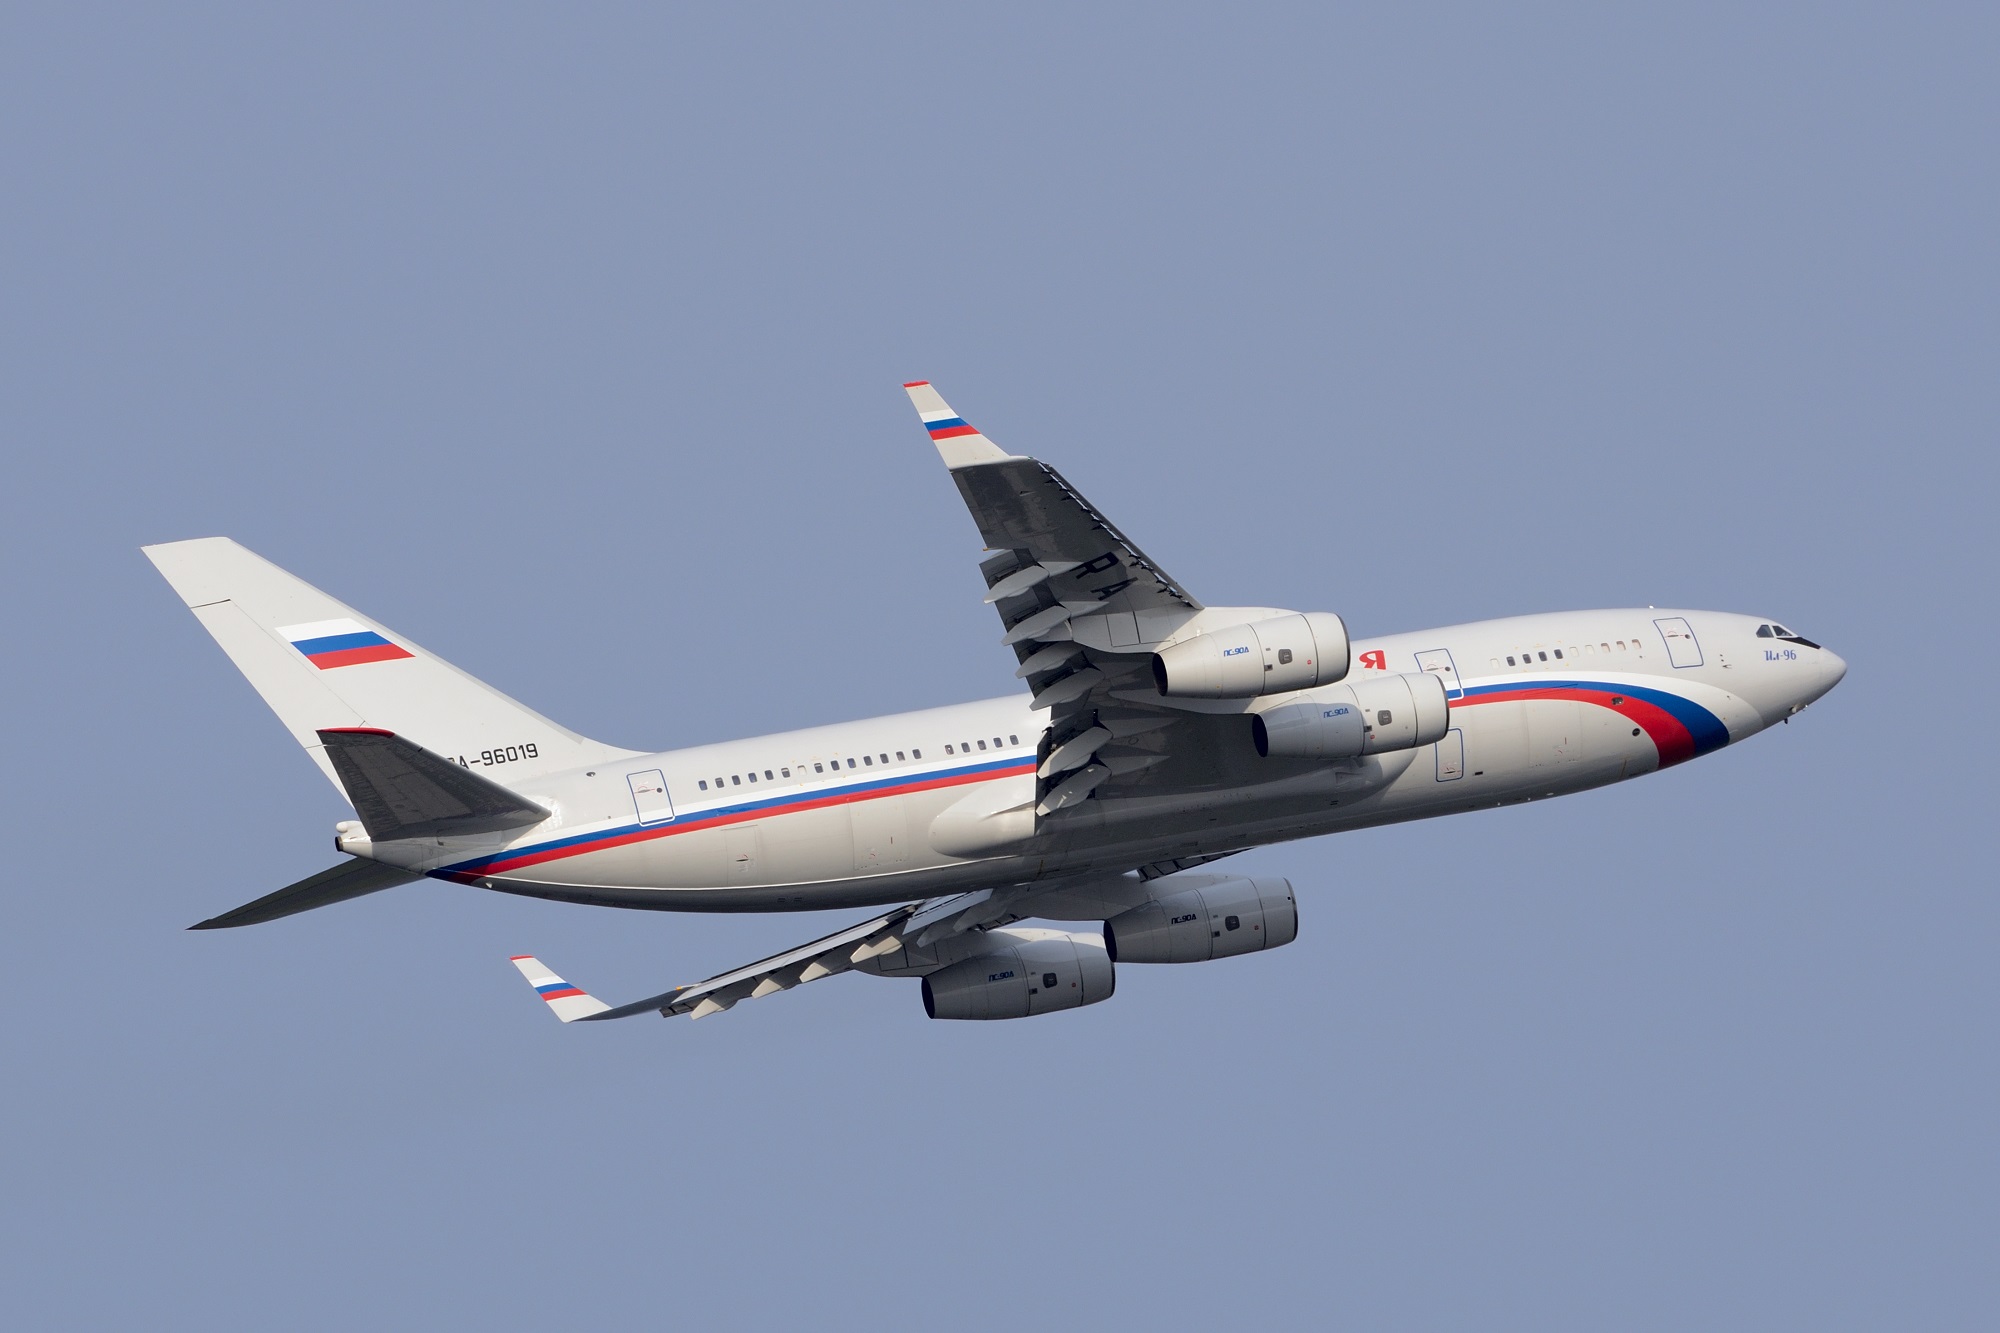 Russian plane given special permission to land in Washington